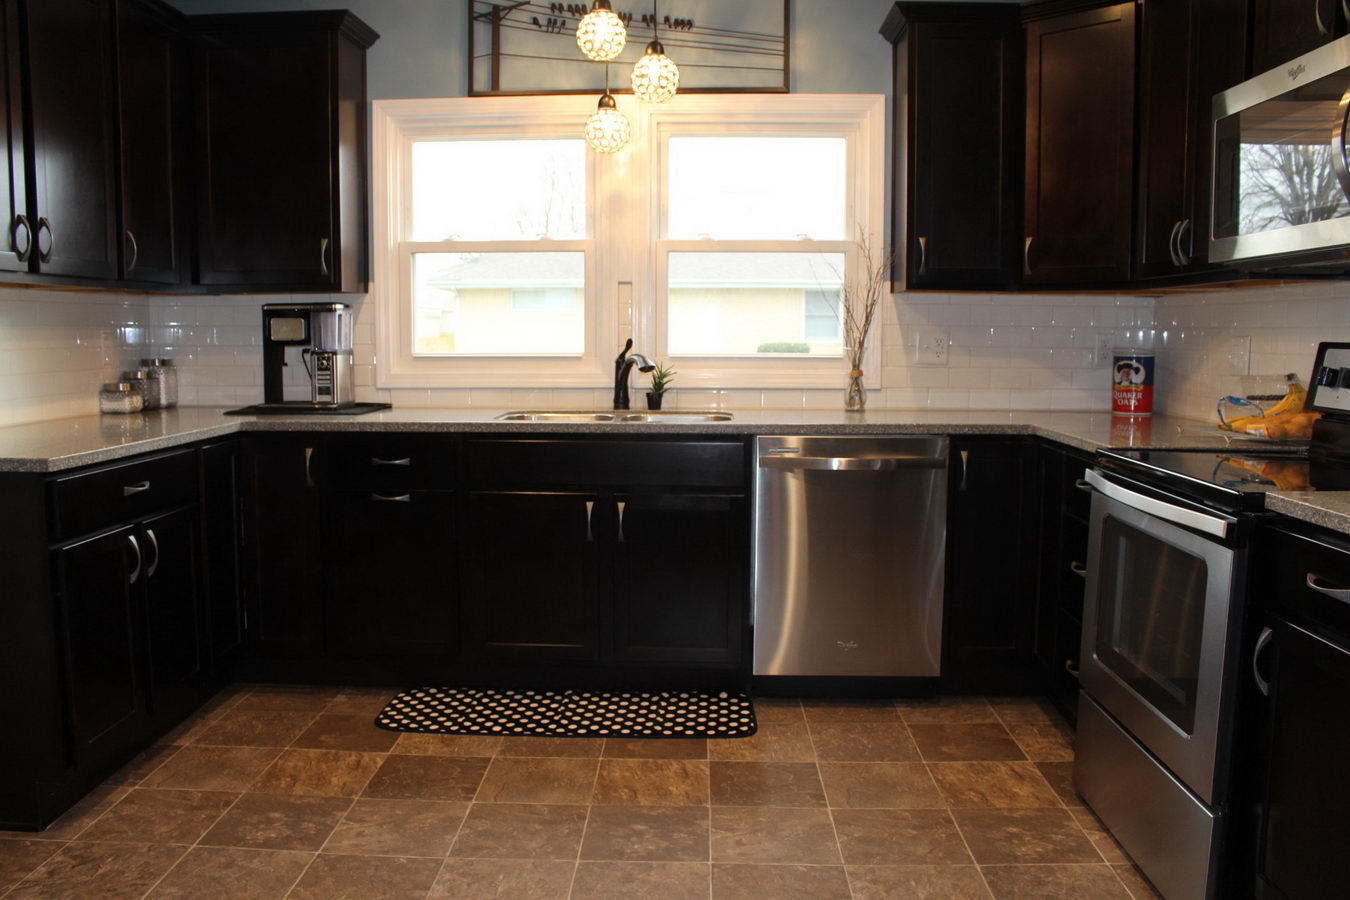 1940's Kitchen and Bath Remodel $65,000-$90,000 - 48